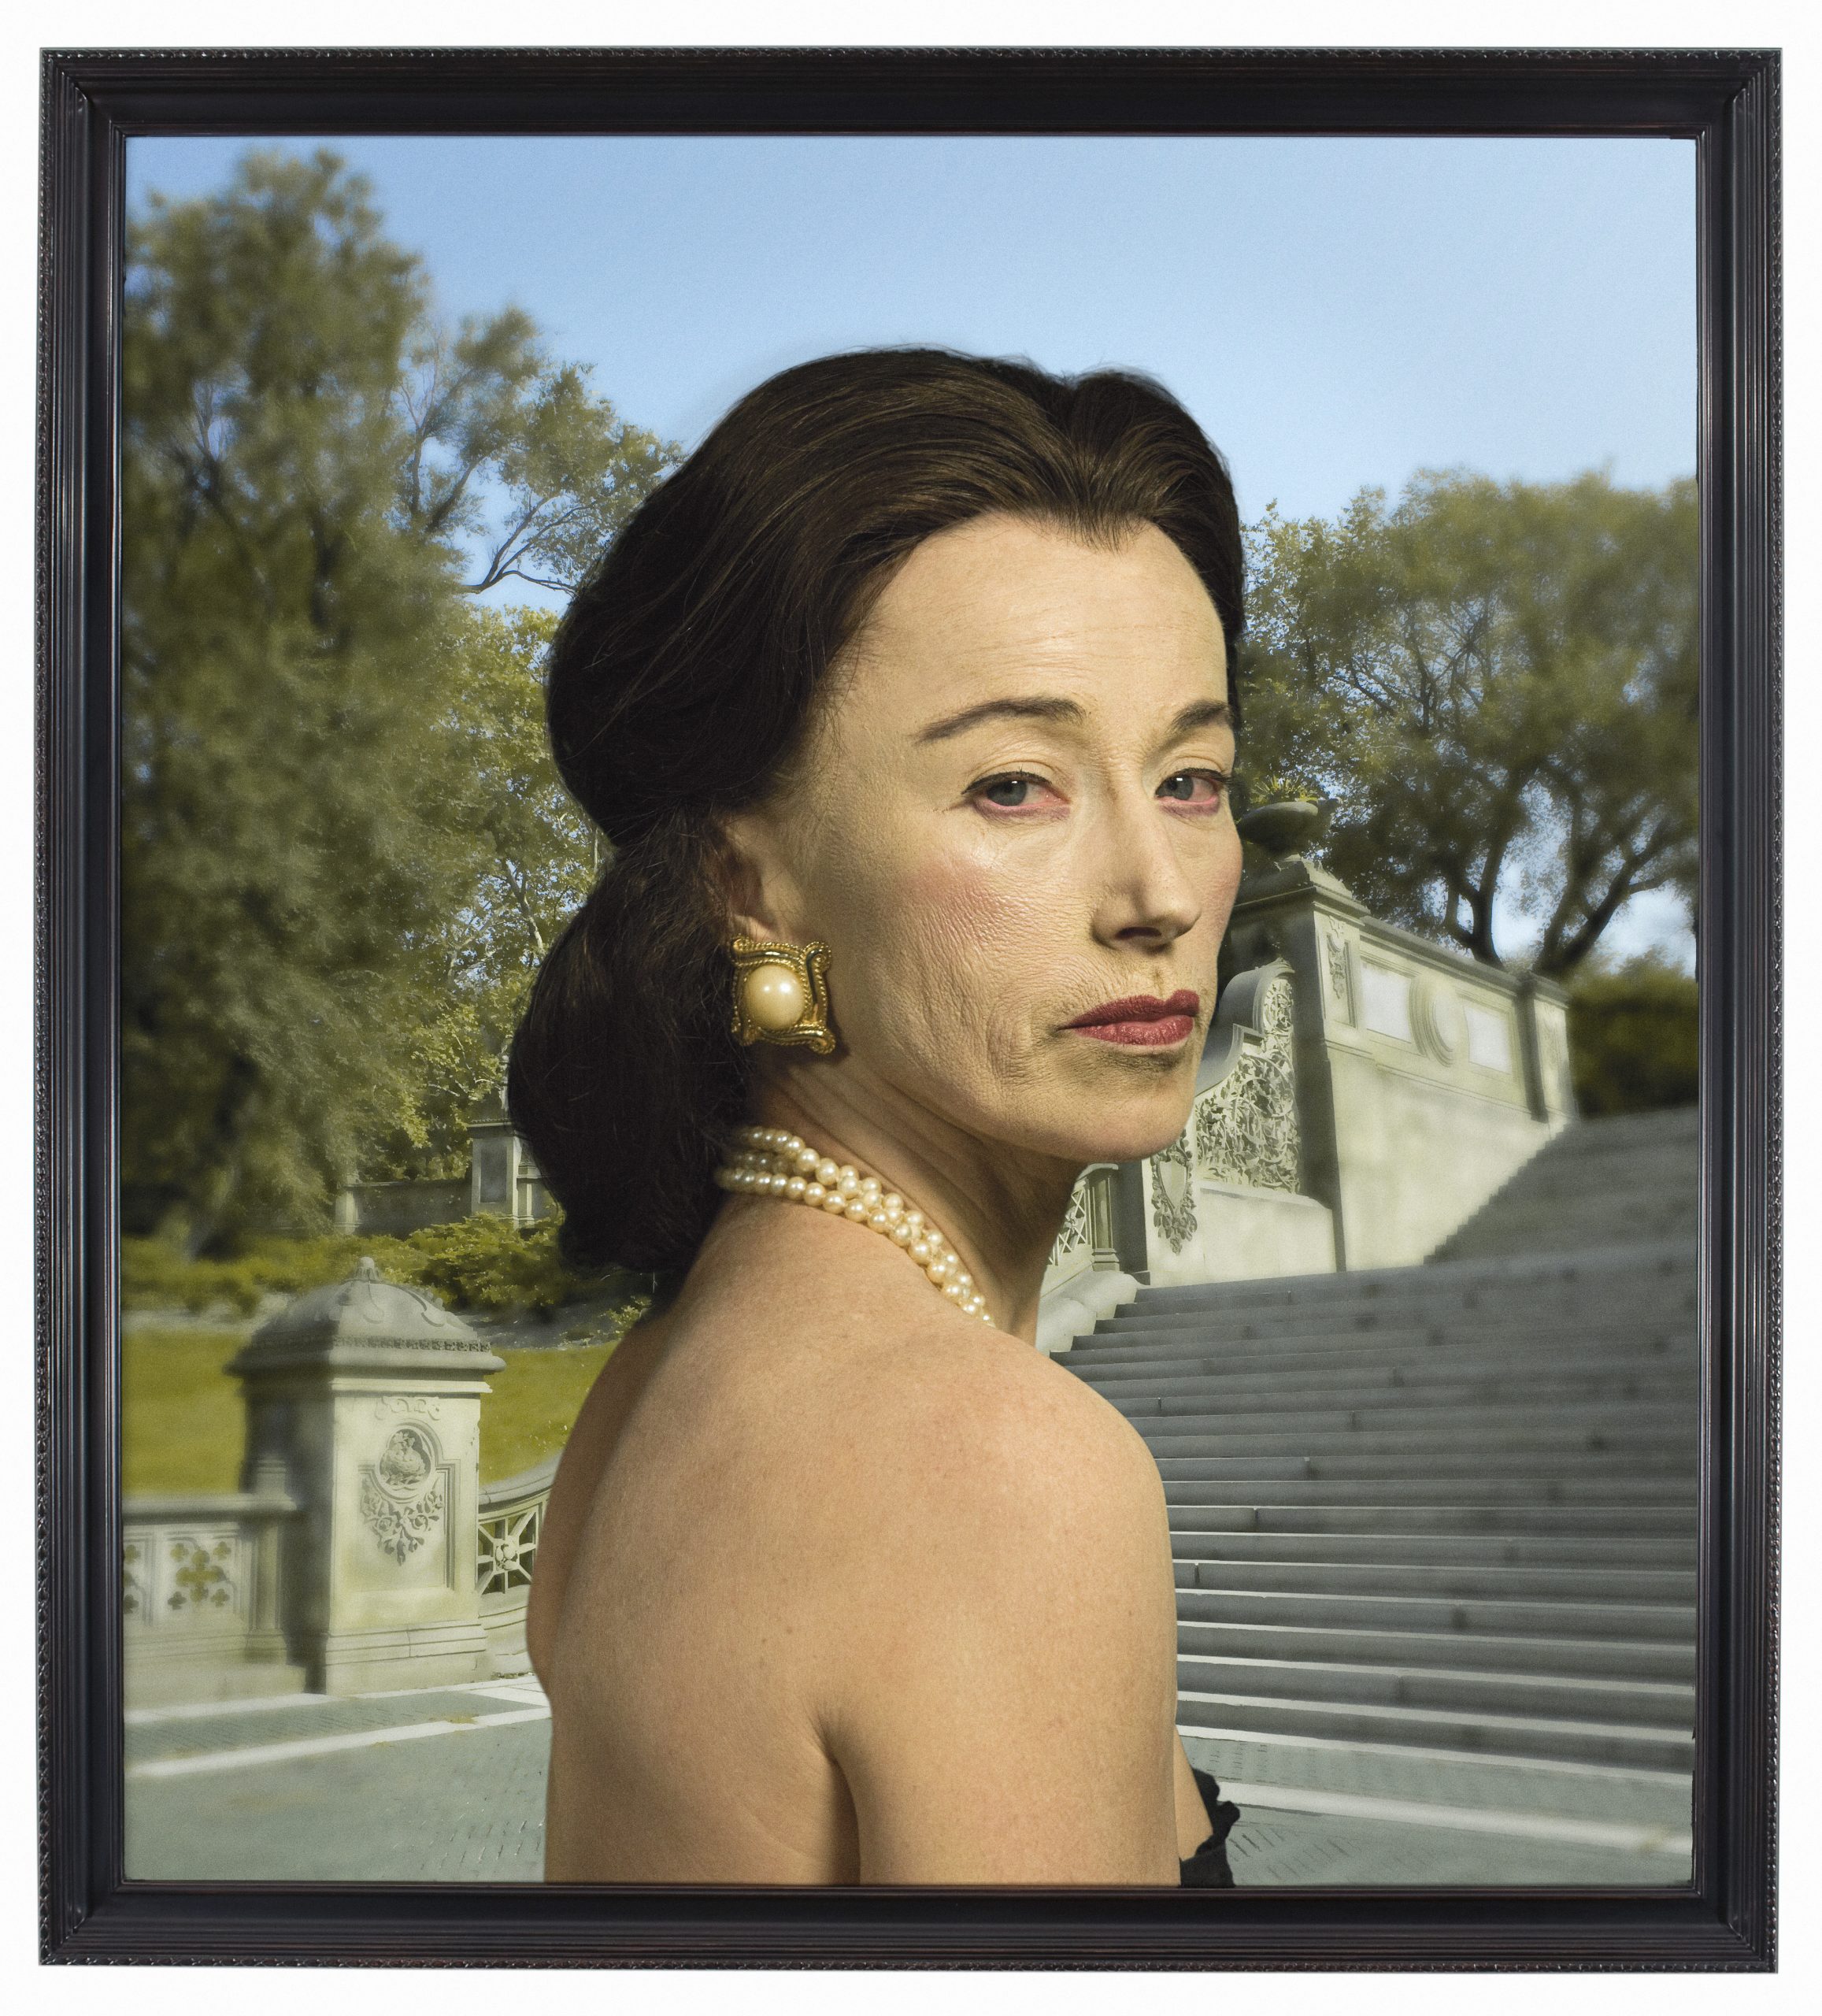 Cindy Sherman, Untitled # 465, 2008 Color chromogenic print, 163.8 x 147.3 cm Courtesy of the artist and Metro Pictures, New York © 2019 Cindy Sherman FAD MAGAZINE